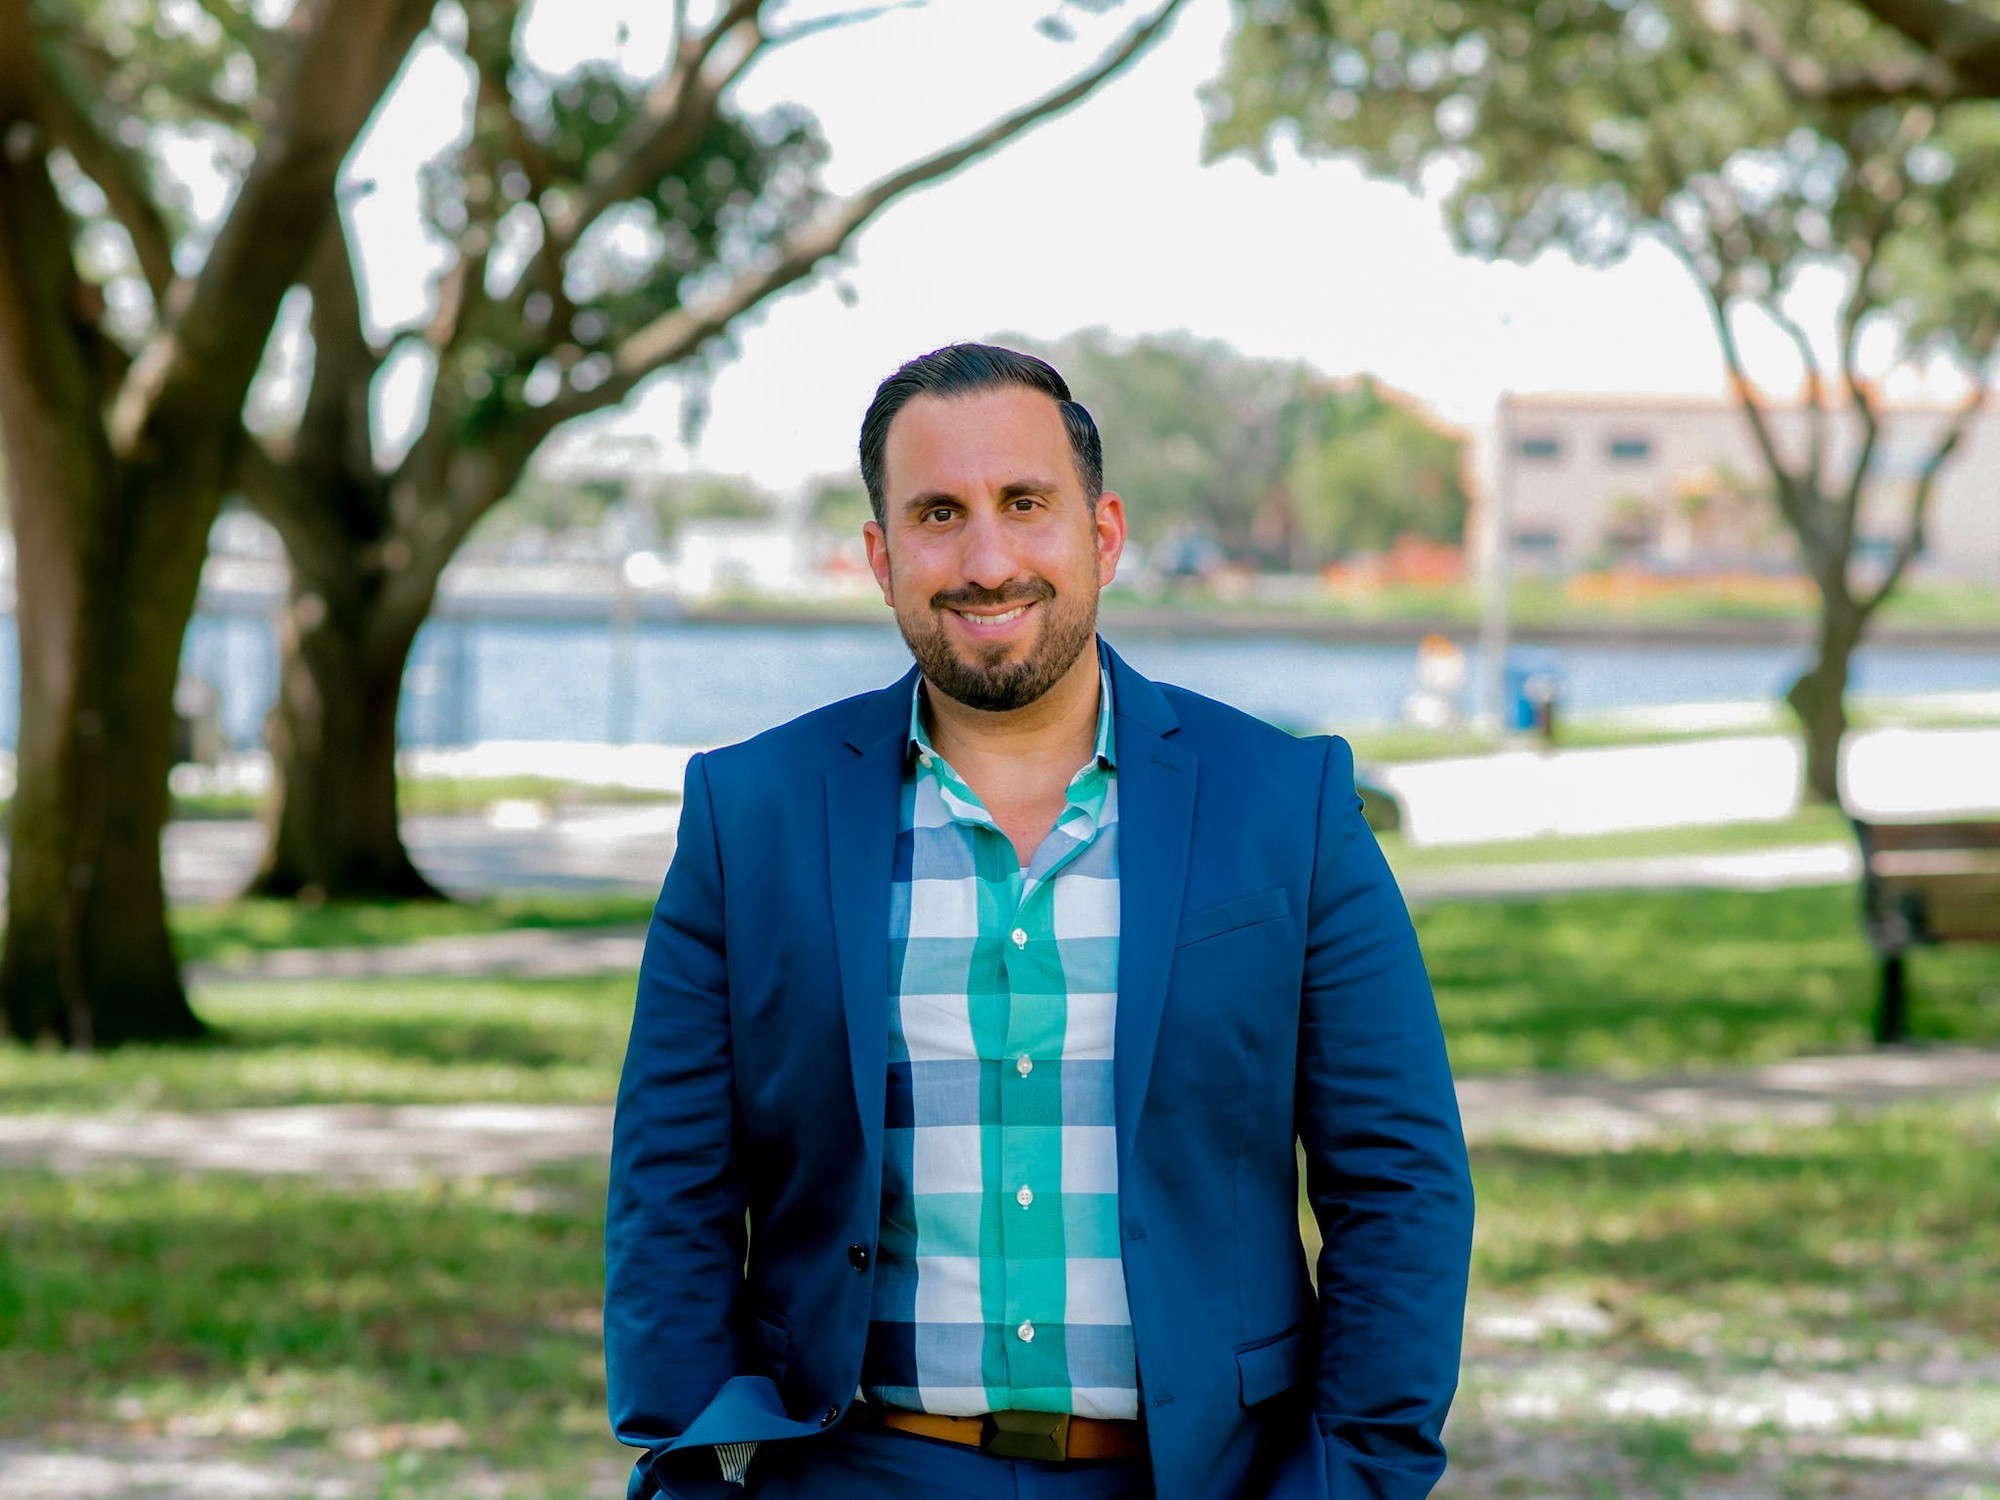 Phil Ginexi is a partner in The Apartment Firm, which brokers multifamily complexes from Hernando County to Fort Myers. (Courtesy photo)